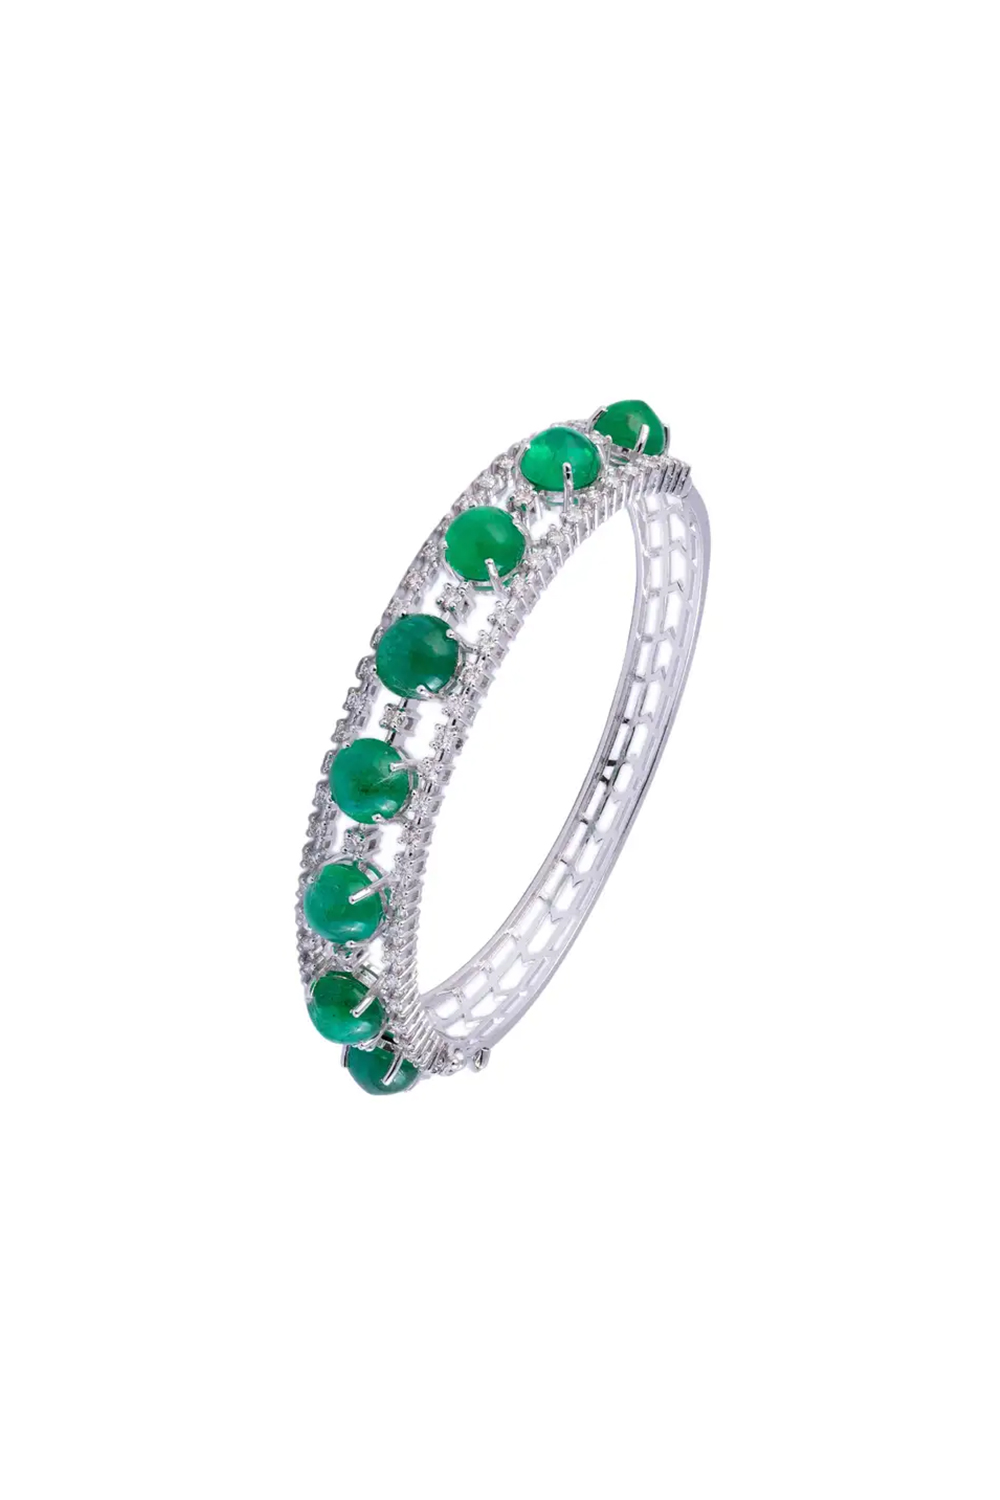 Natural Zambian Emerald 15.18cts and 1.59cts Diamond Bracelet in 14k Gold